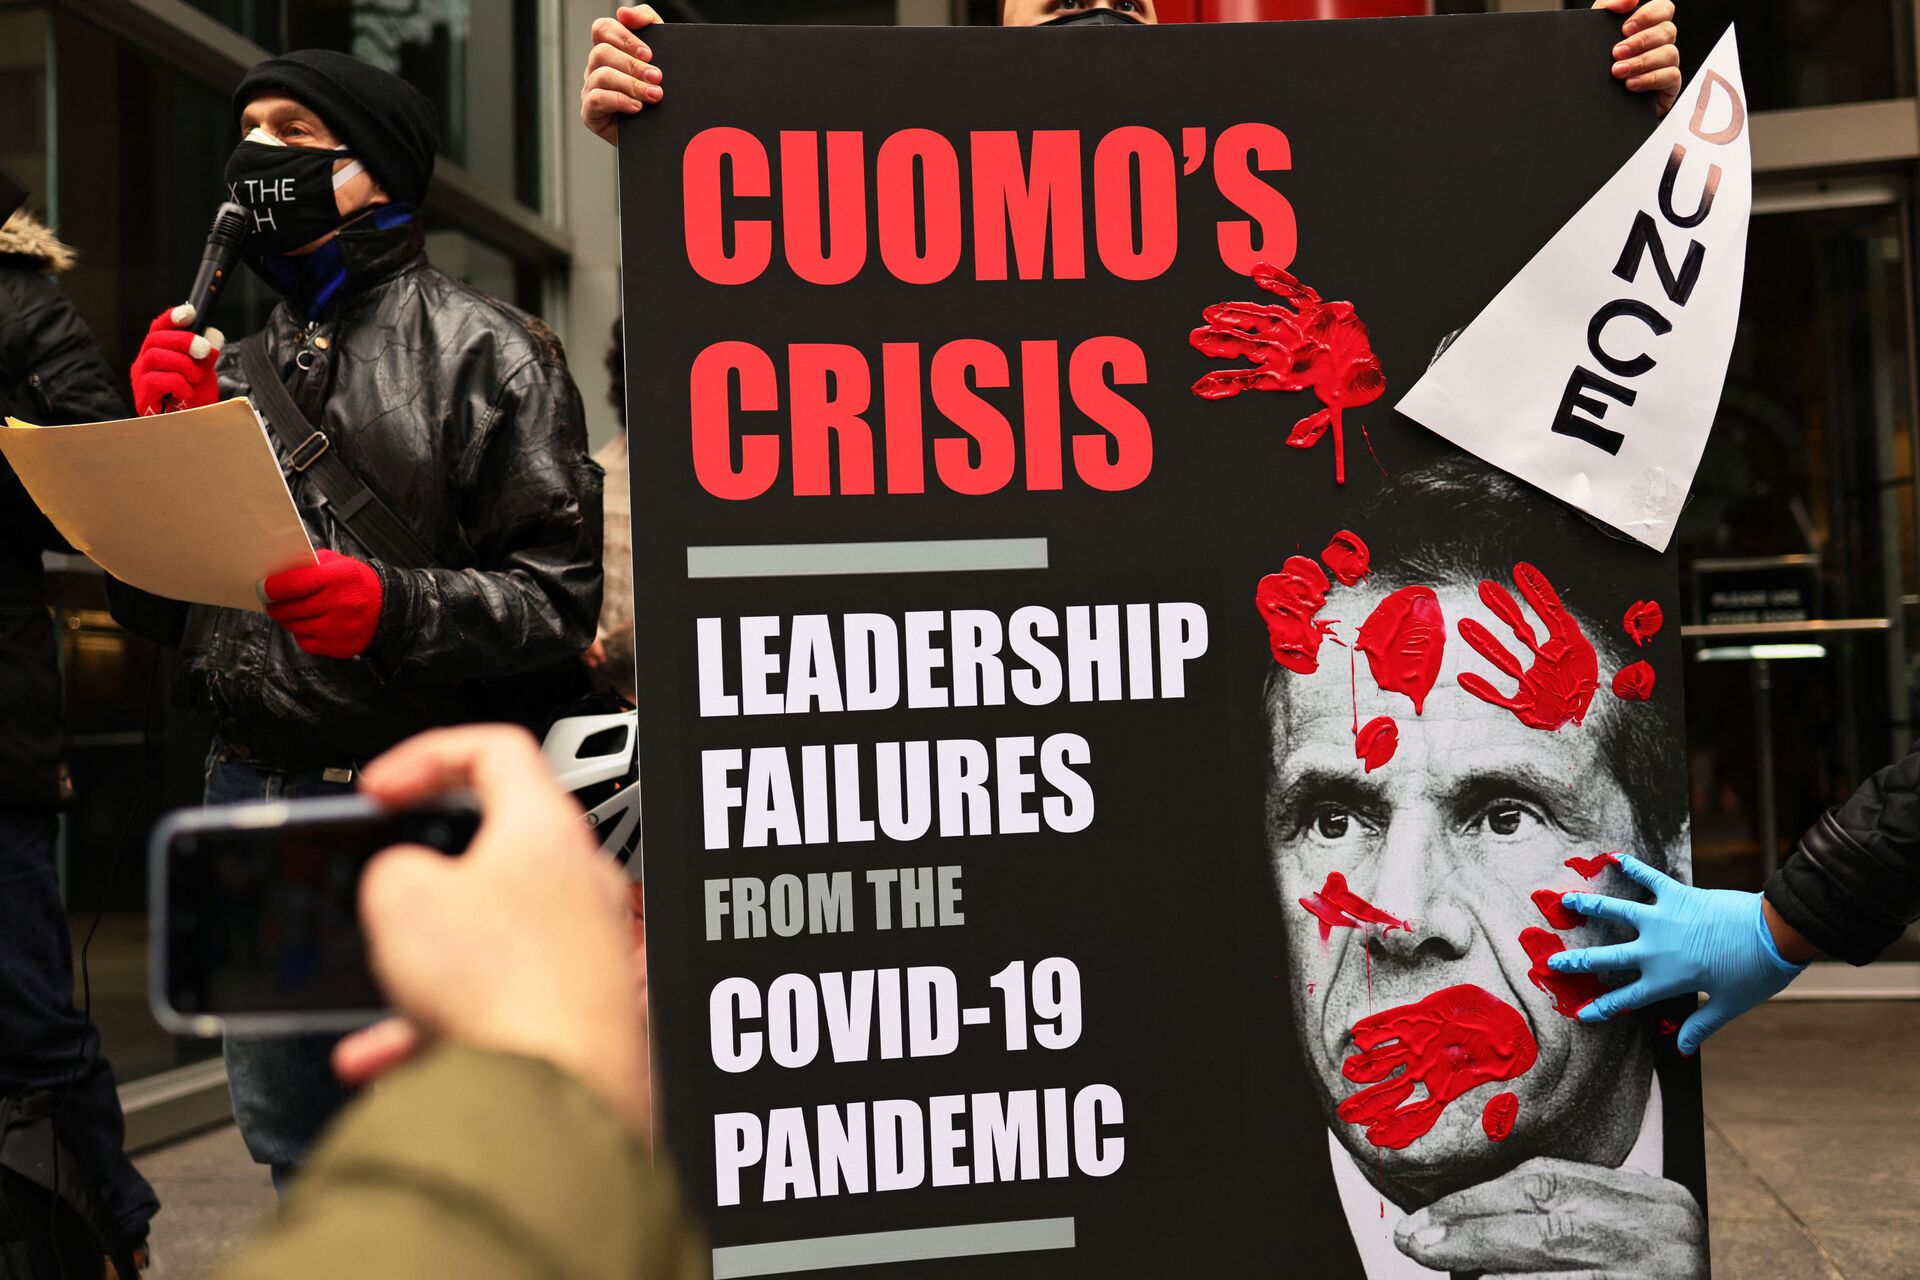 NEW YORK, NEW YORK - MARCH 01: A person places his red painted hands on a poster of Gov. Andrew Cuomo's book as people gather outside of his NYC office to protest against cuts to health care on March 01, 2021 in New York City - Sputnik International, 1920, 15.12.2021